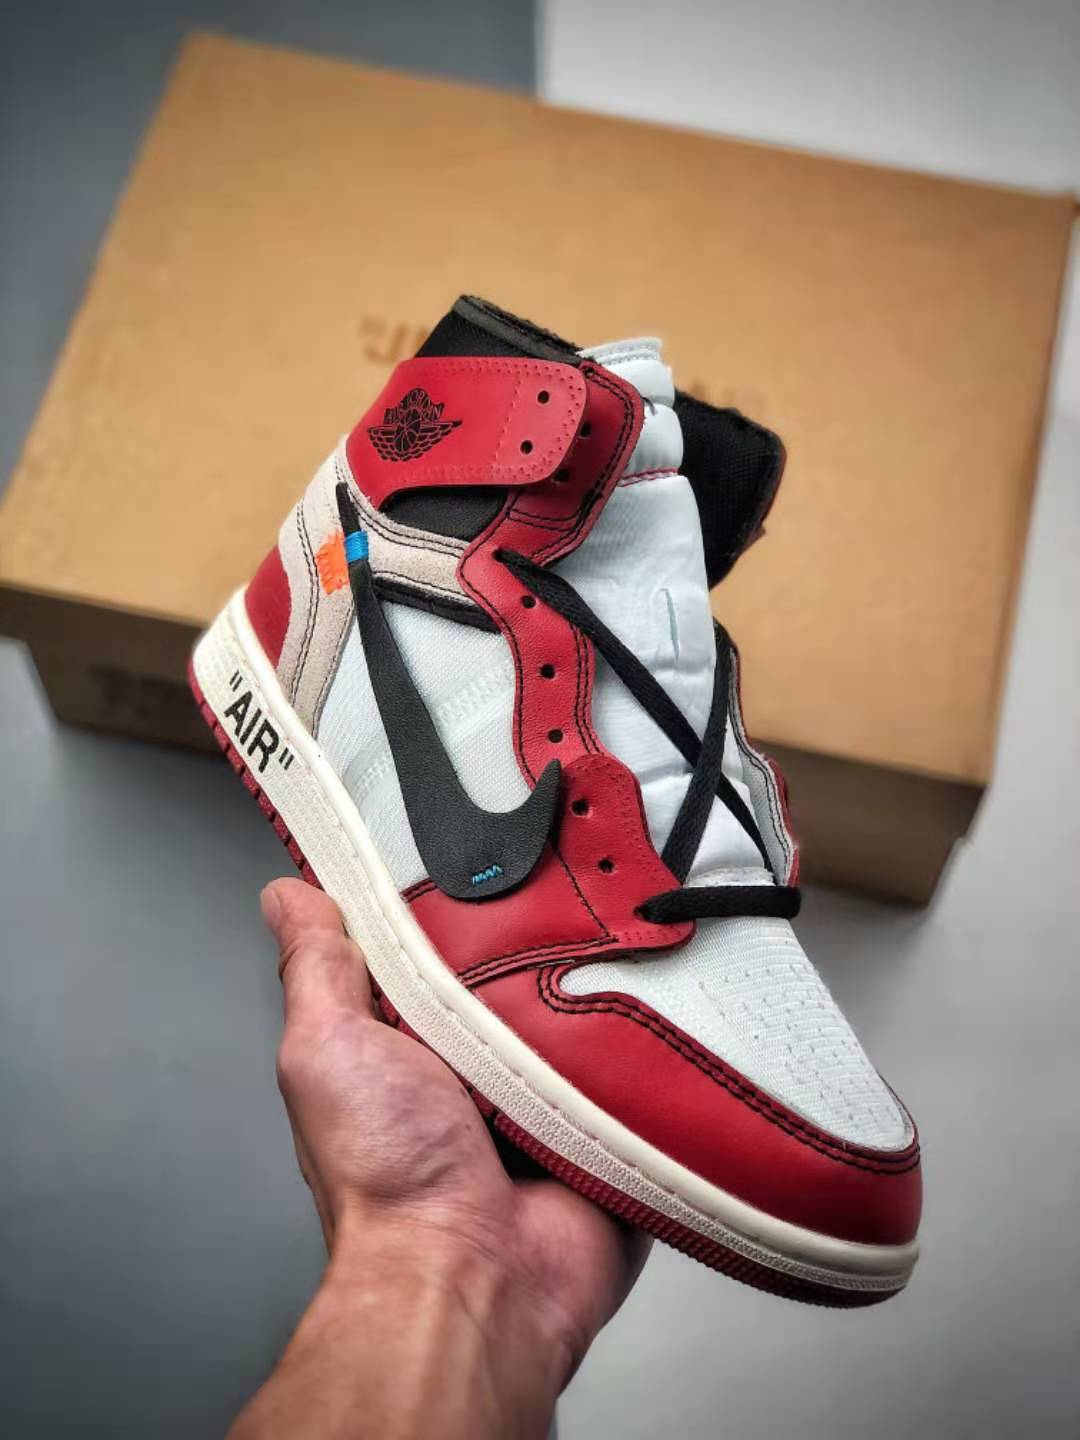 Off-White x Air Jordan 1 Retro High OG 'Chicago' AA3834-101: Iconic Collaboration for Sneakerheads